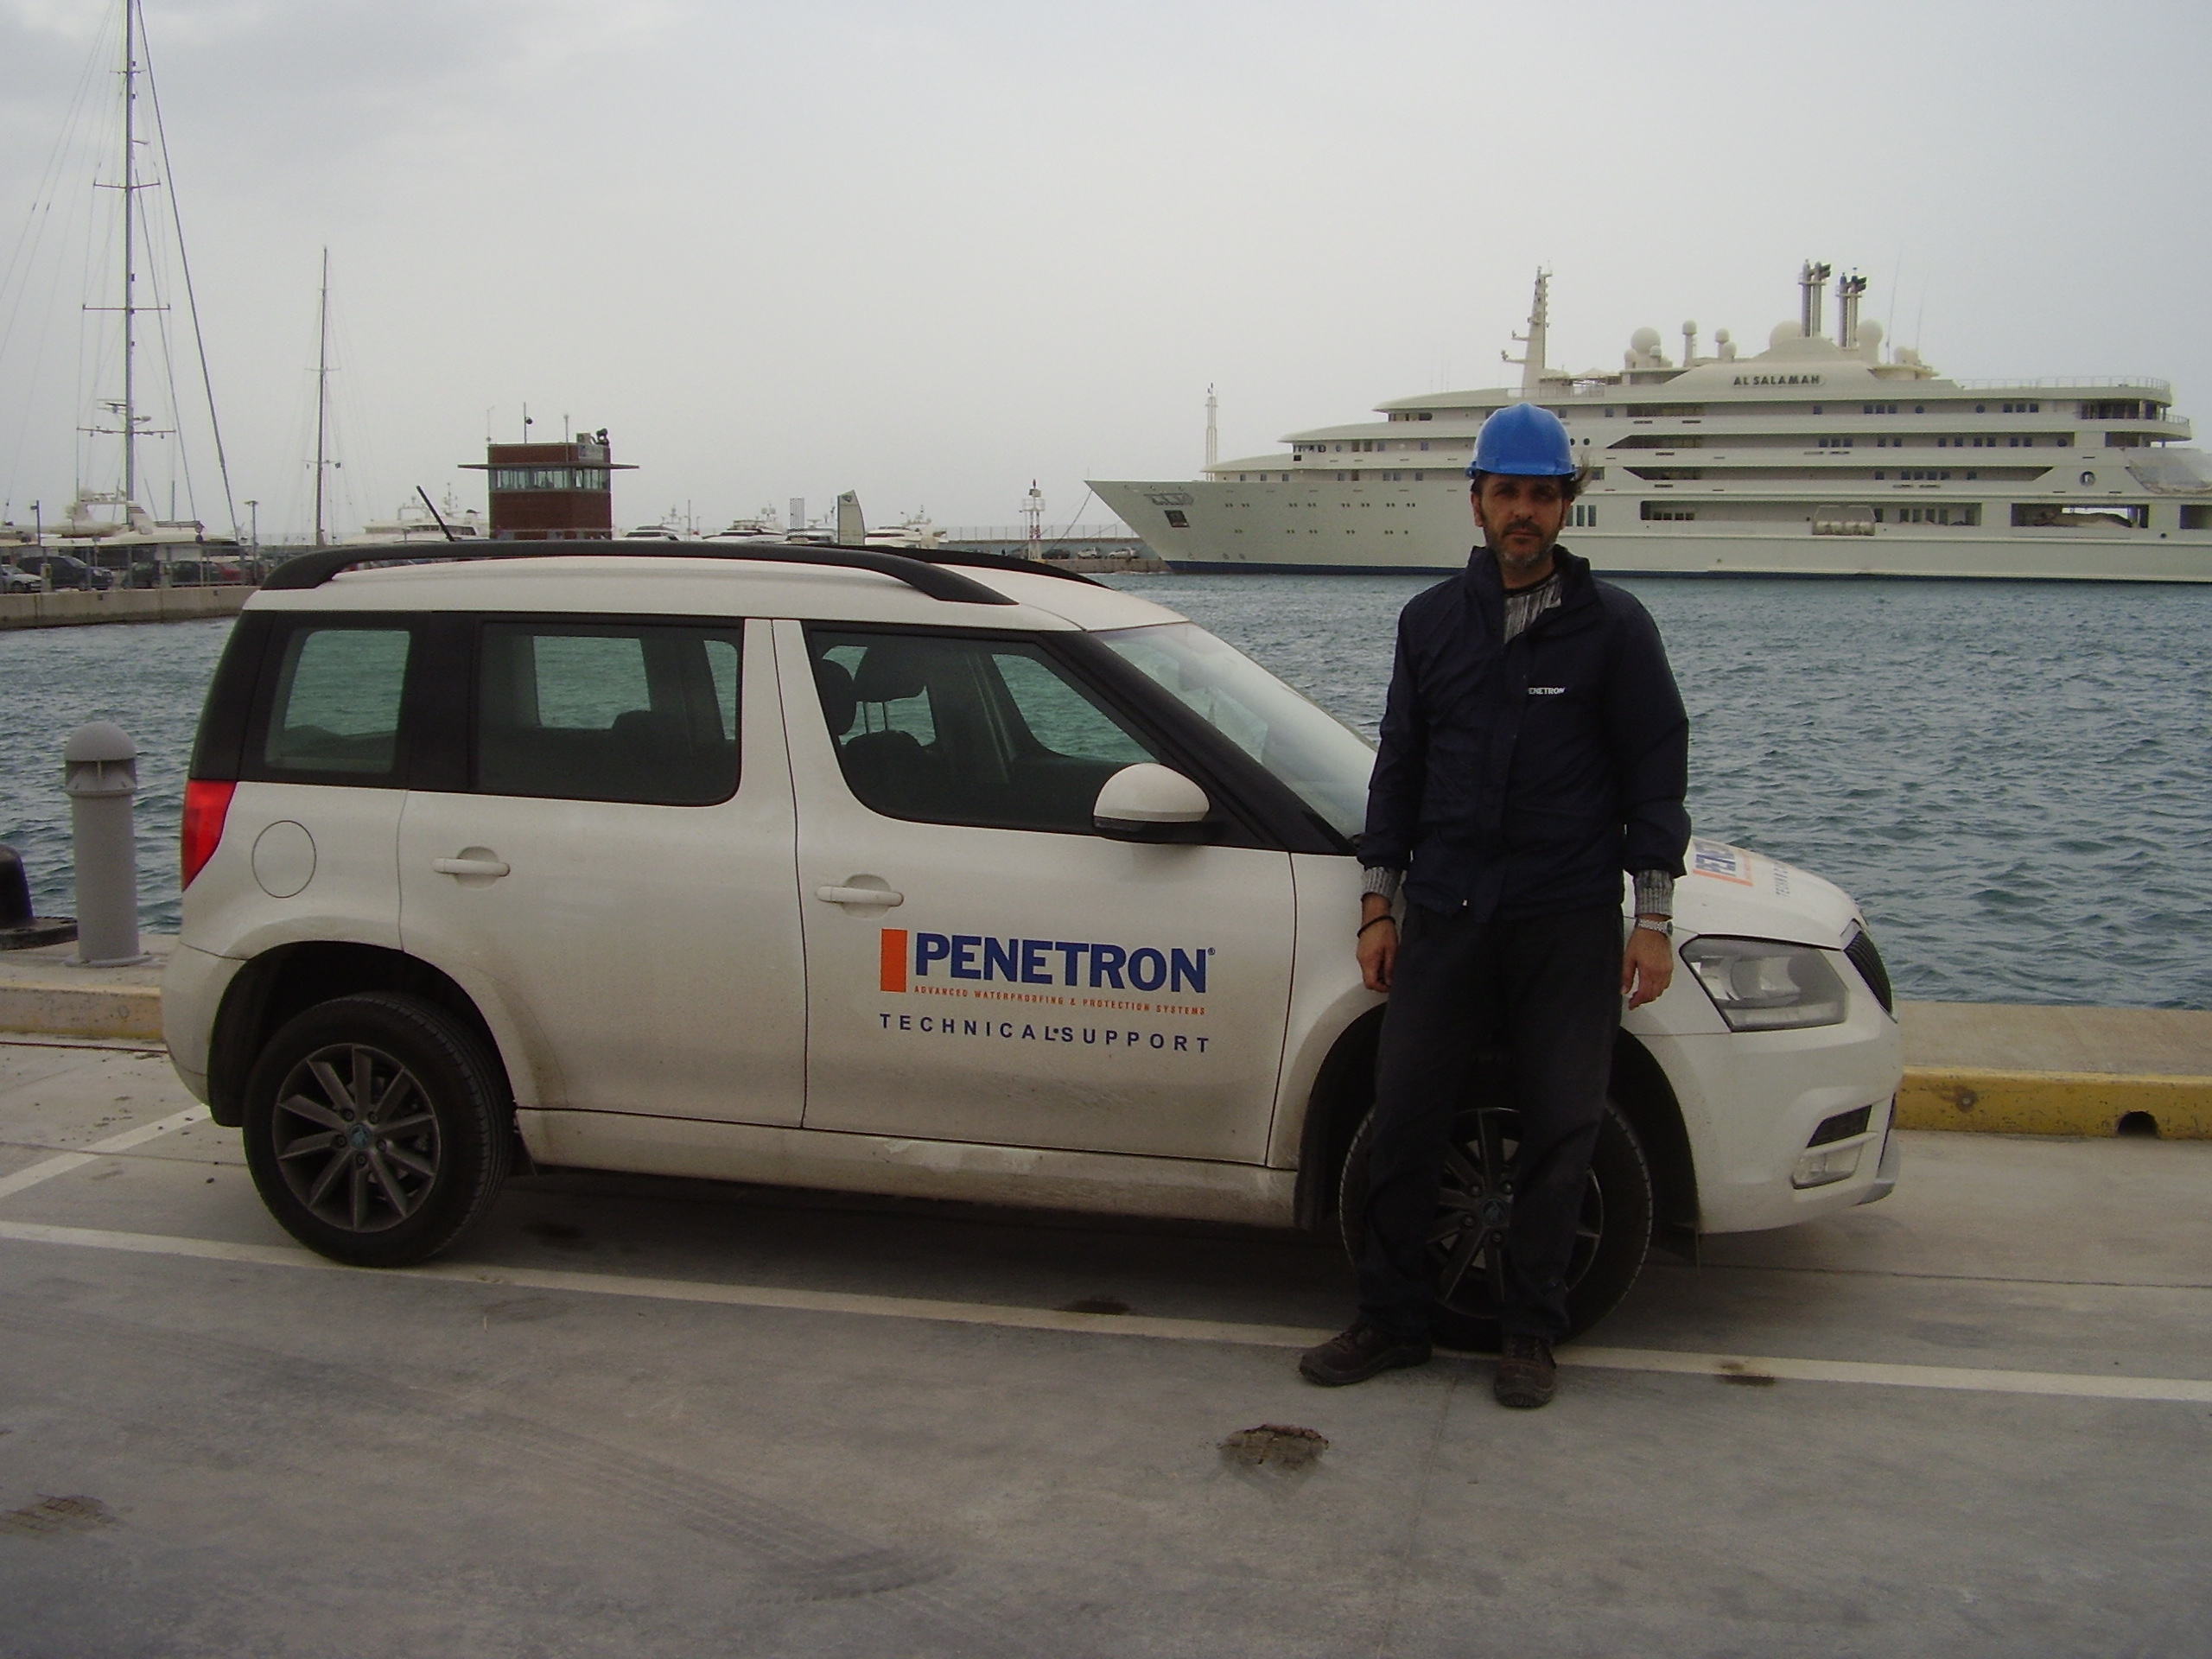 Penetron Hellas Engineer Nikos Frouzakis, seen here at the mega-yacht marina construction site in Flisvos, Greece, makes sure the job is done perfectly.